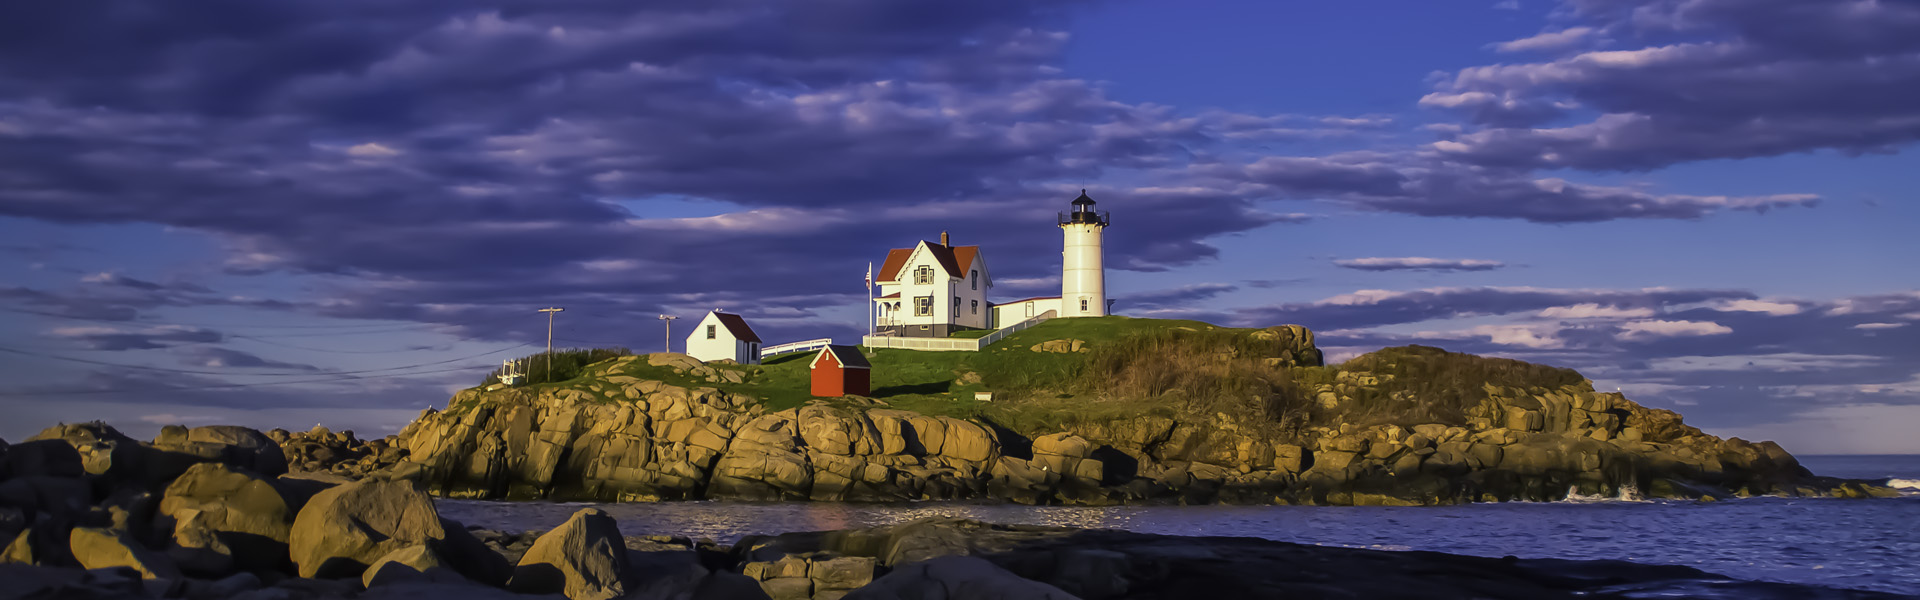 Nubble Lighthouse in York Maine.